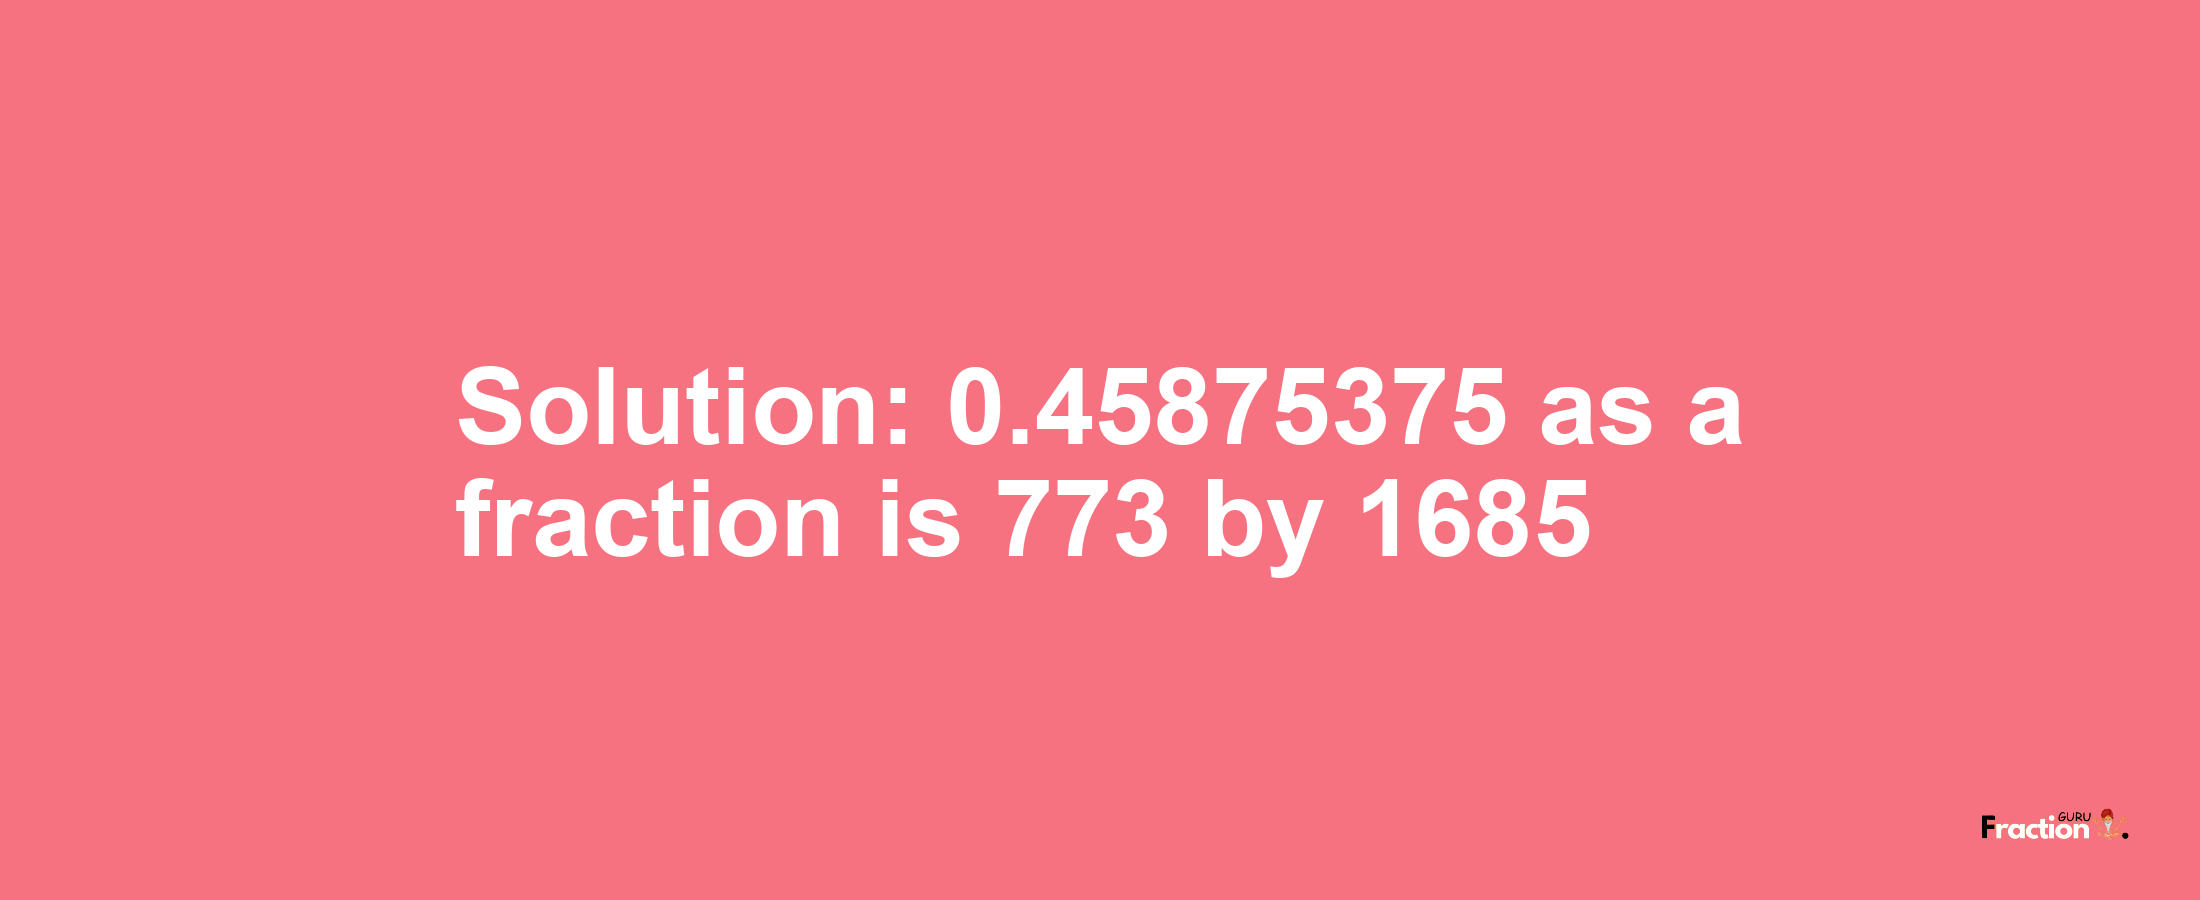 Solution:0.45875375 as a fraction is 773/1685